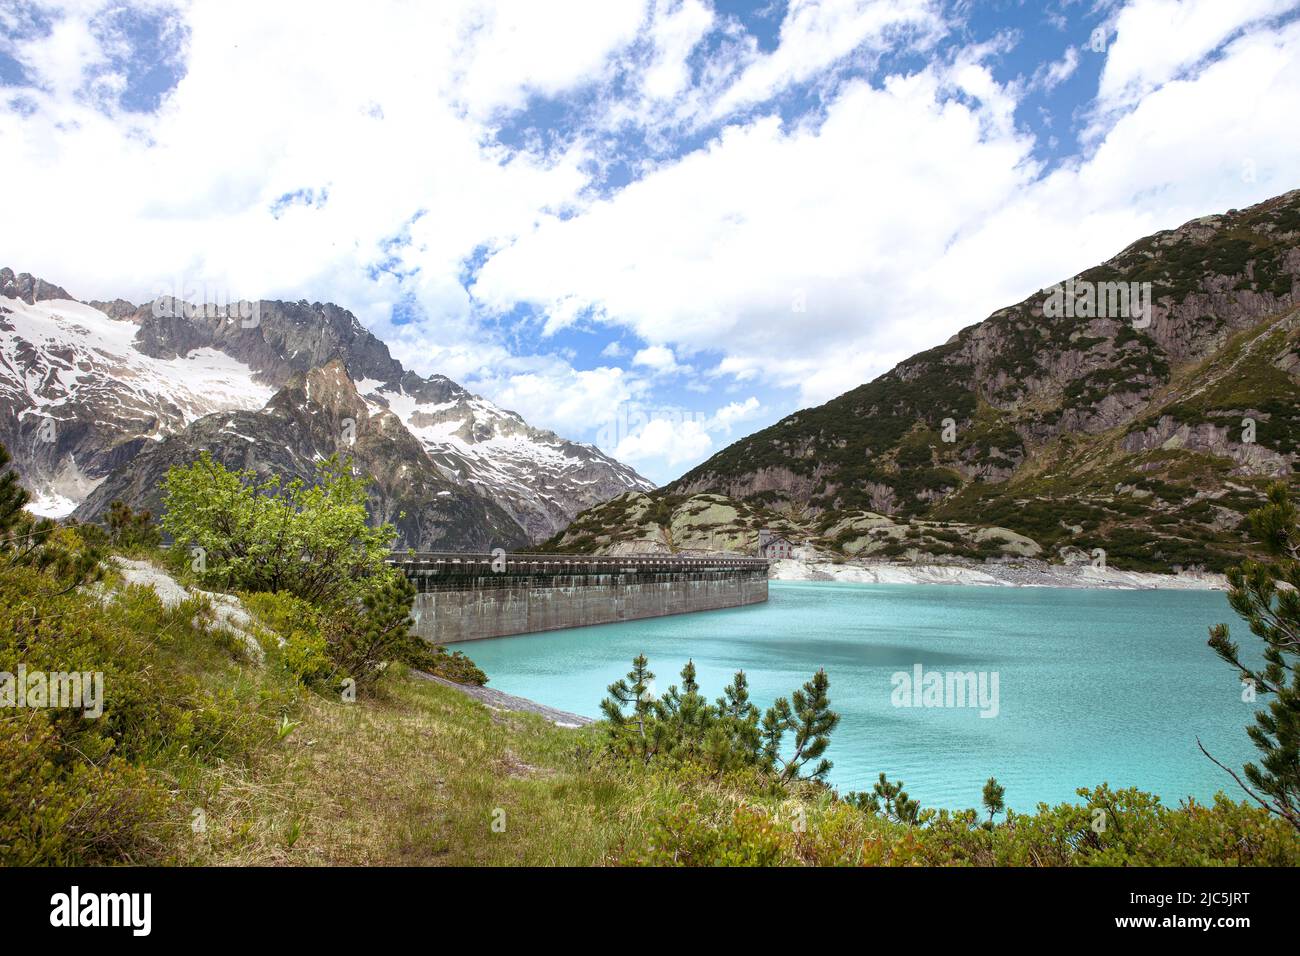 Alps mountains beautiful landscape with turquoise water lake. High mountains nature and view on dam of Gelmer lake reservoir, sunny summer day. Stock Photo